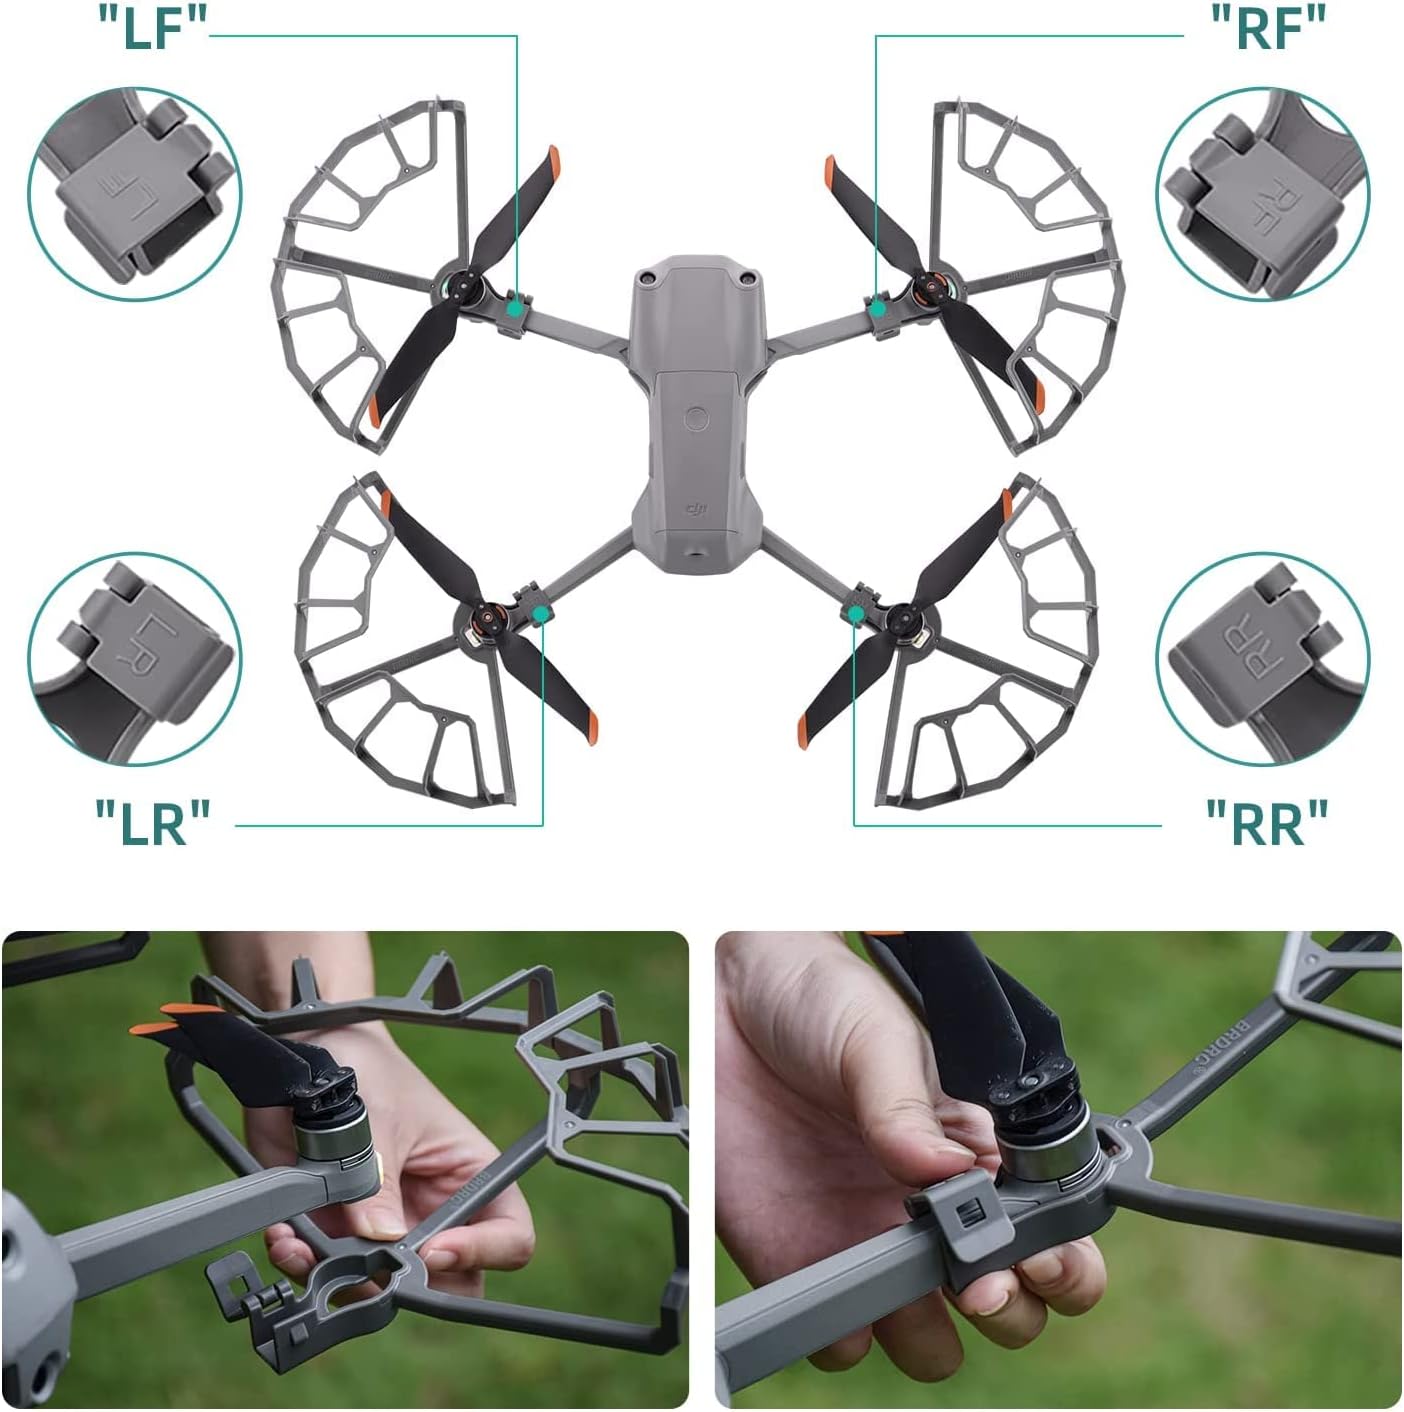 Propeller Guard, Blade Guard, Propeller Guard Ring, Anti-Collision Bumper Ring for Mavic Air2, for Dji Mavic Air 2 Drone 360° Propeller Protection Cover, Propeller Protective Safety Accessory